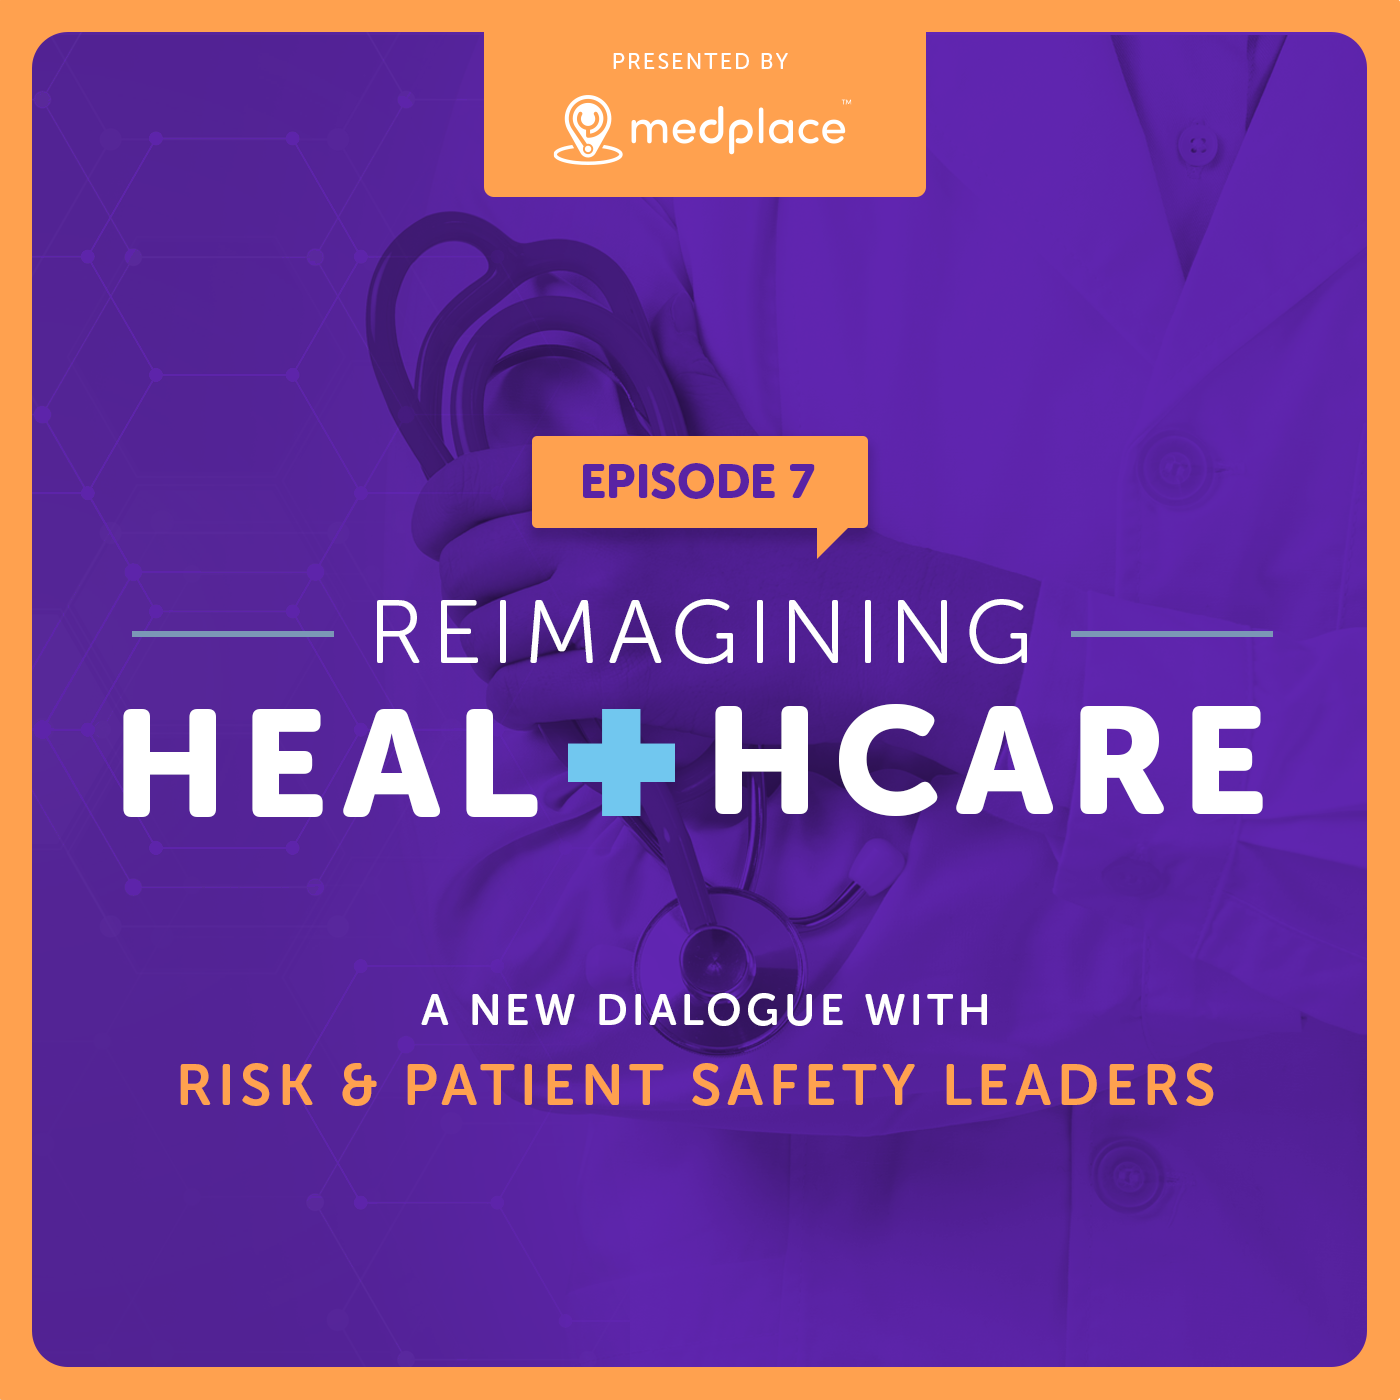 Episode 7 - Reimagining Healthcare - A New Dialogue with Risk and Patient Safety Leaders